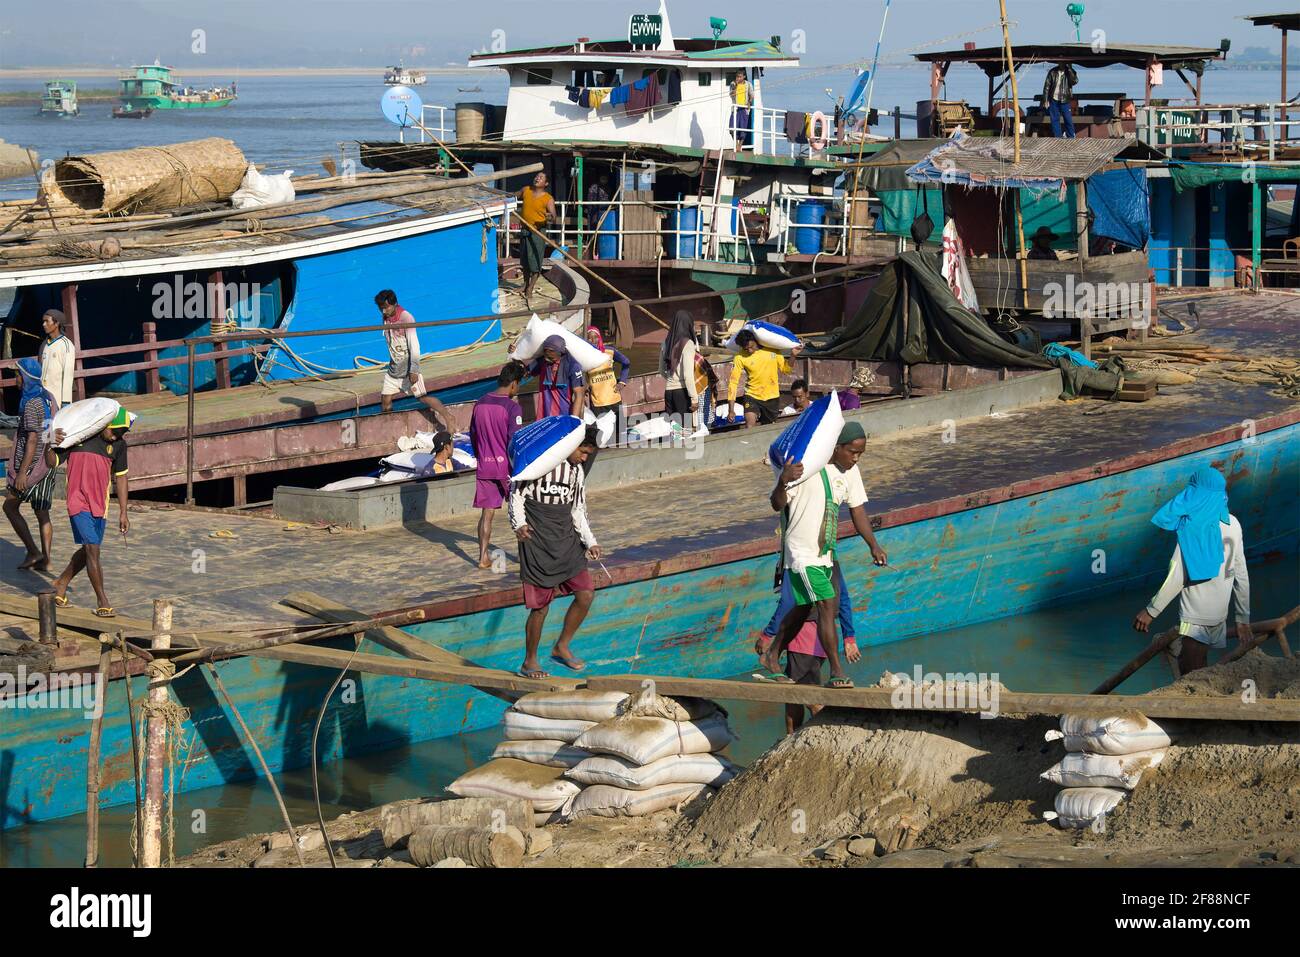 MANDALAY, MYANMAR - DECEMBER 21, 2016: Unloading a barge in the river port Stock Photo